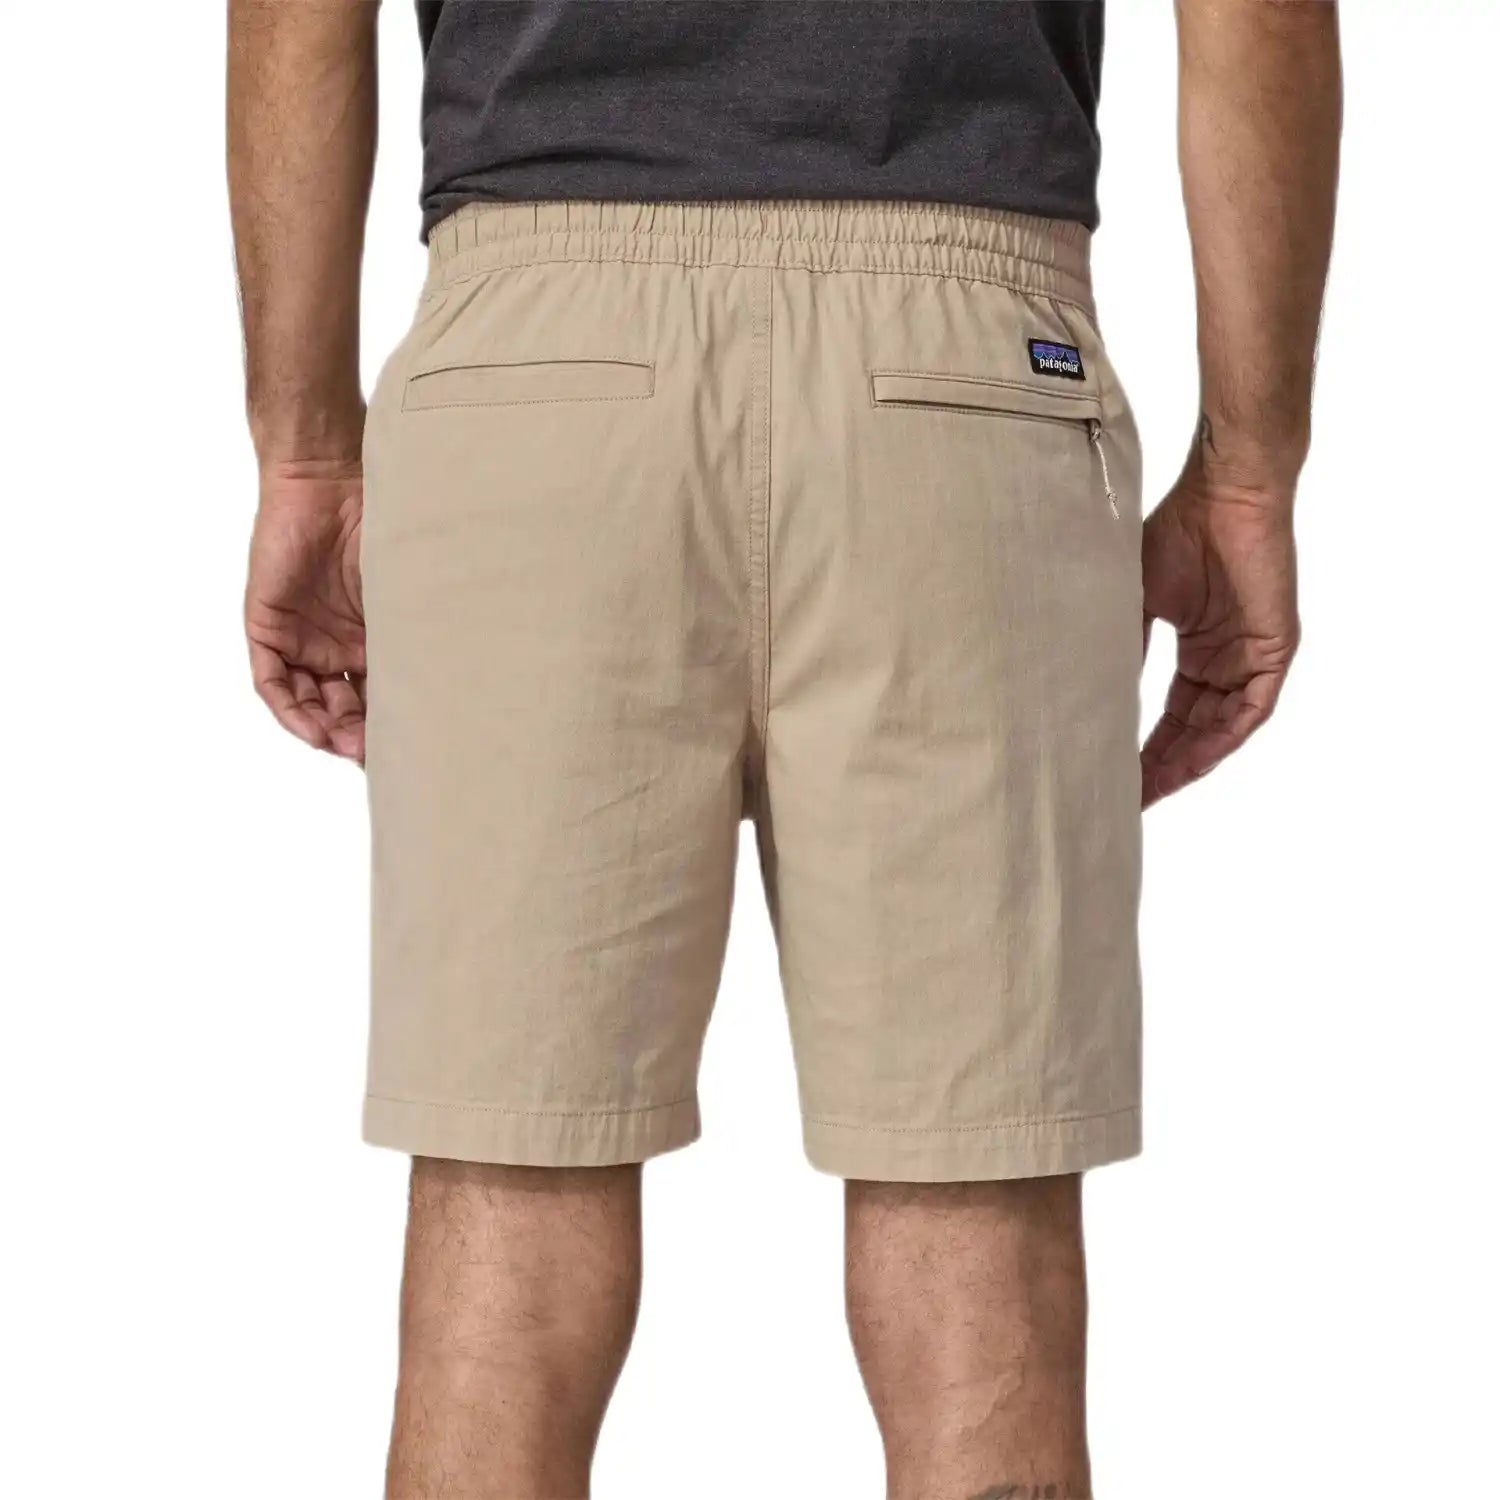 Patagonia M's Nomader Volley Shorts, Oar Tan, back view on model